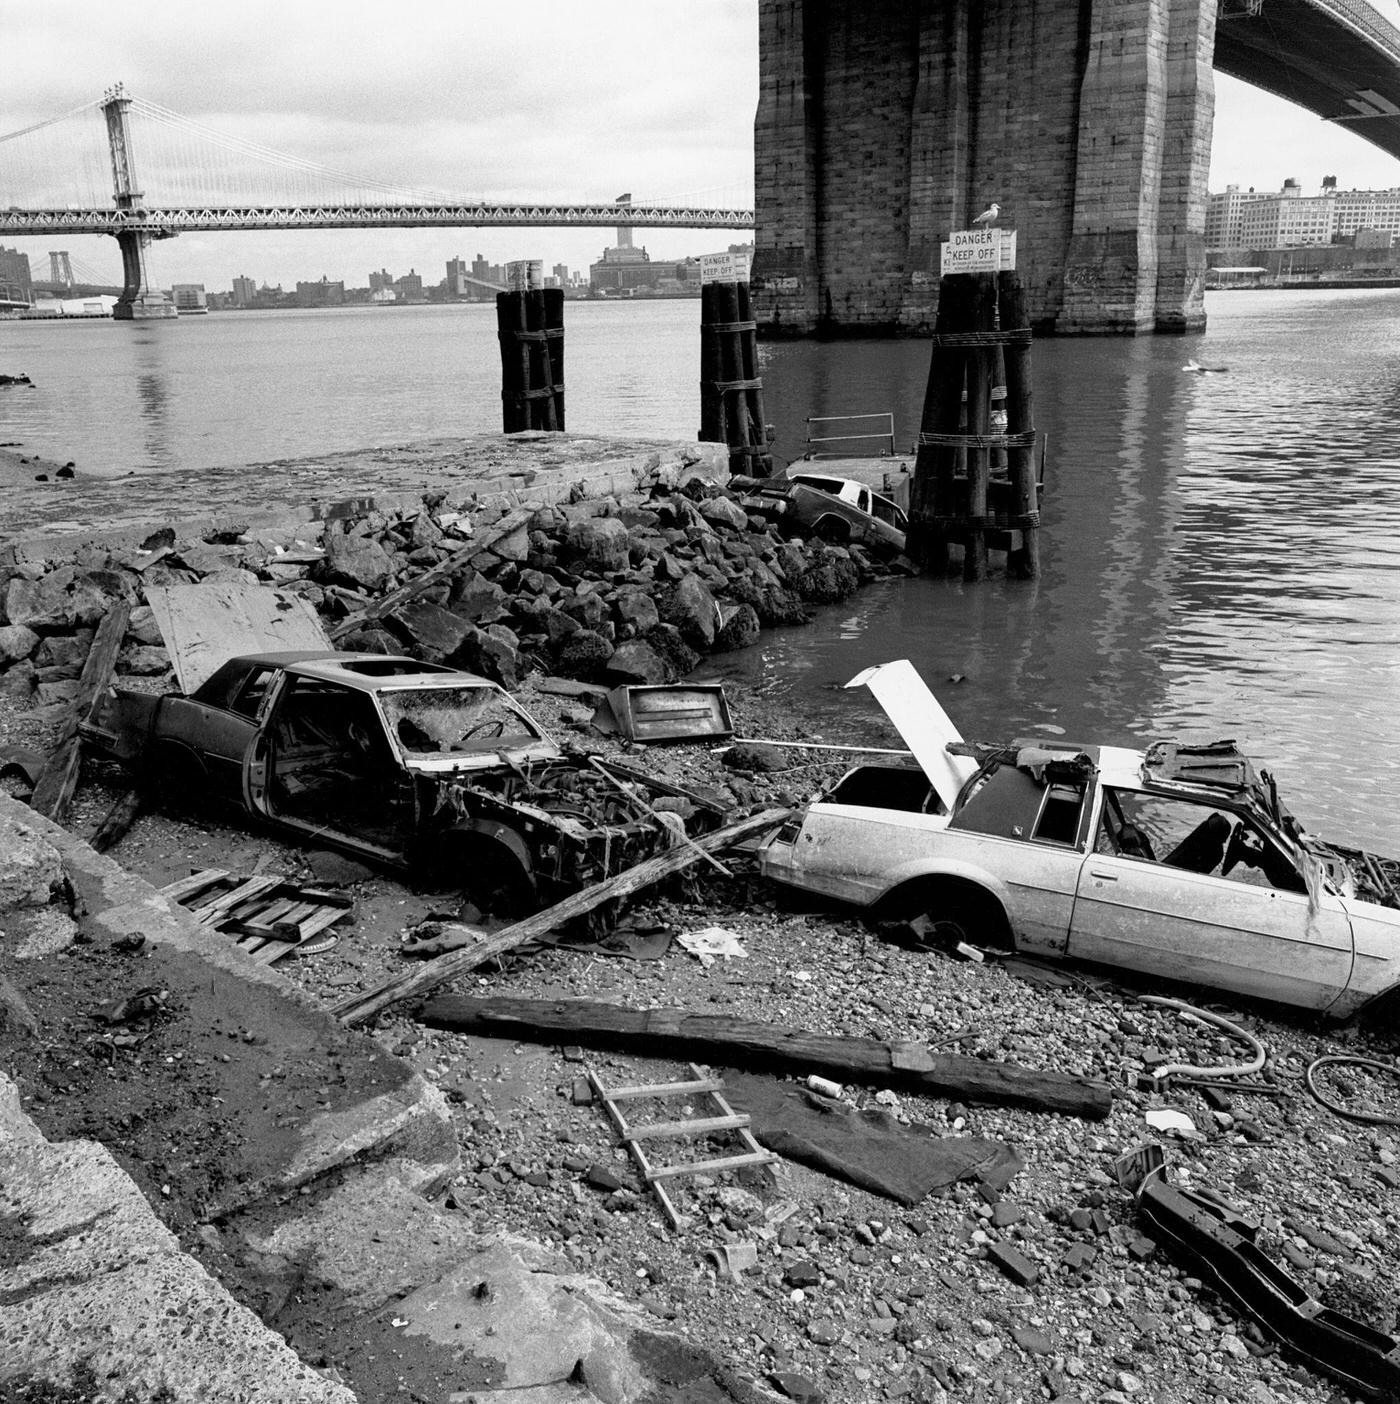 Abandoned Cars Under Brooklyn Bridge, Two Abandoned Cars Under The Brooklyn Bridge With Manhattan Bridge And East River In Background, Manhattan, 1990